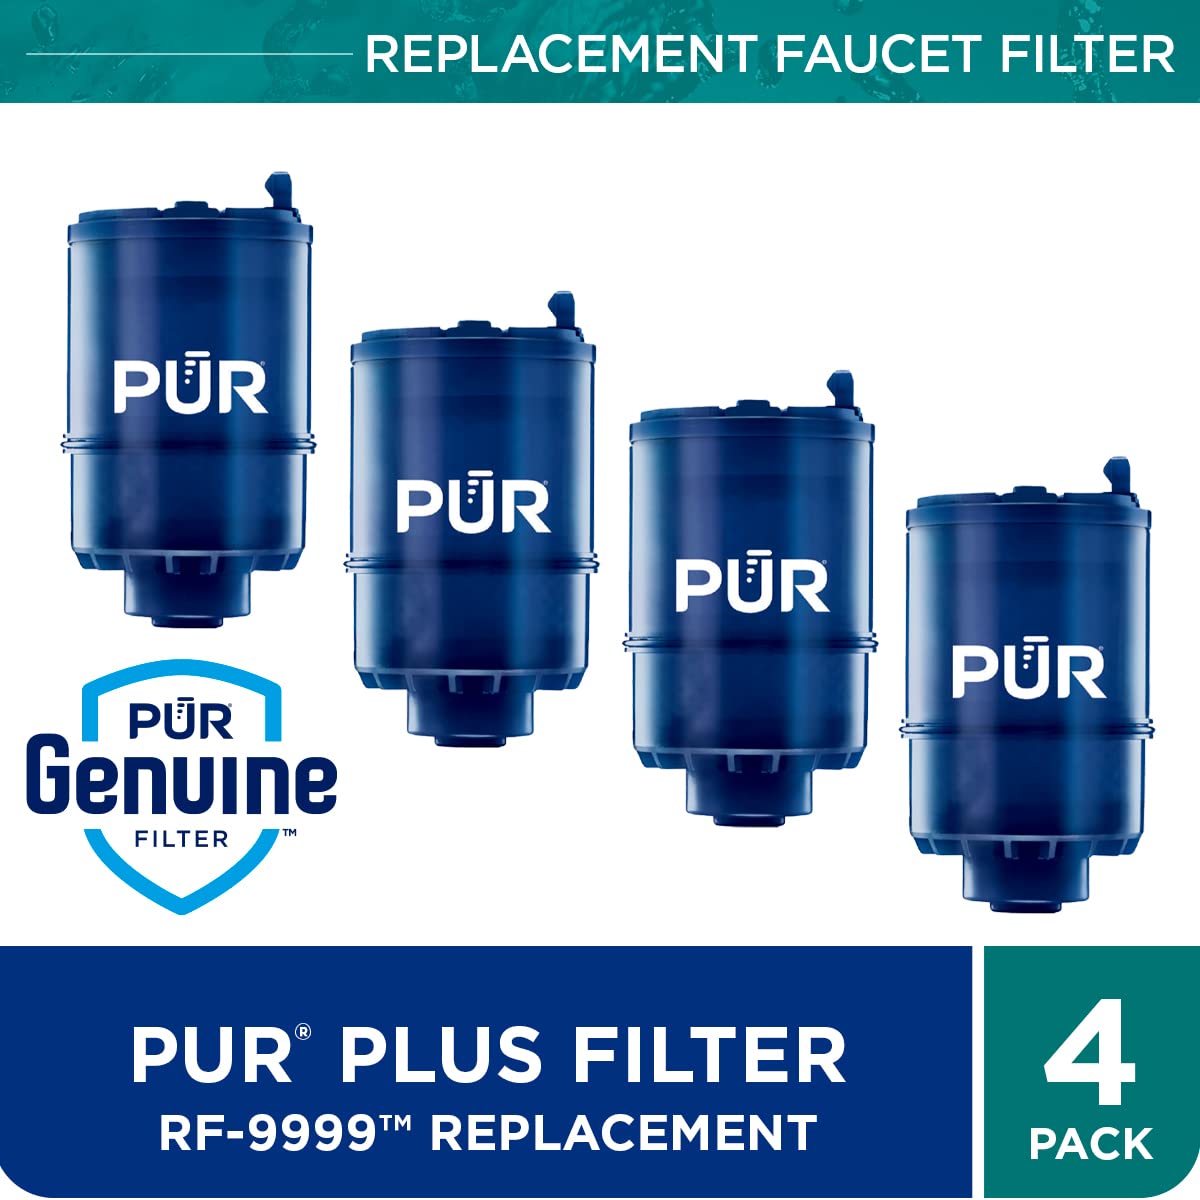 PUR PLUS Mineral Core Faucet Mount Water Filter Replacement (4 Pack) & PLUS Faucet Mount Water Filtration System, Gray – Vertical Faucet Mount for Crisp, Refreshing Water, FM2500V